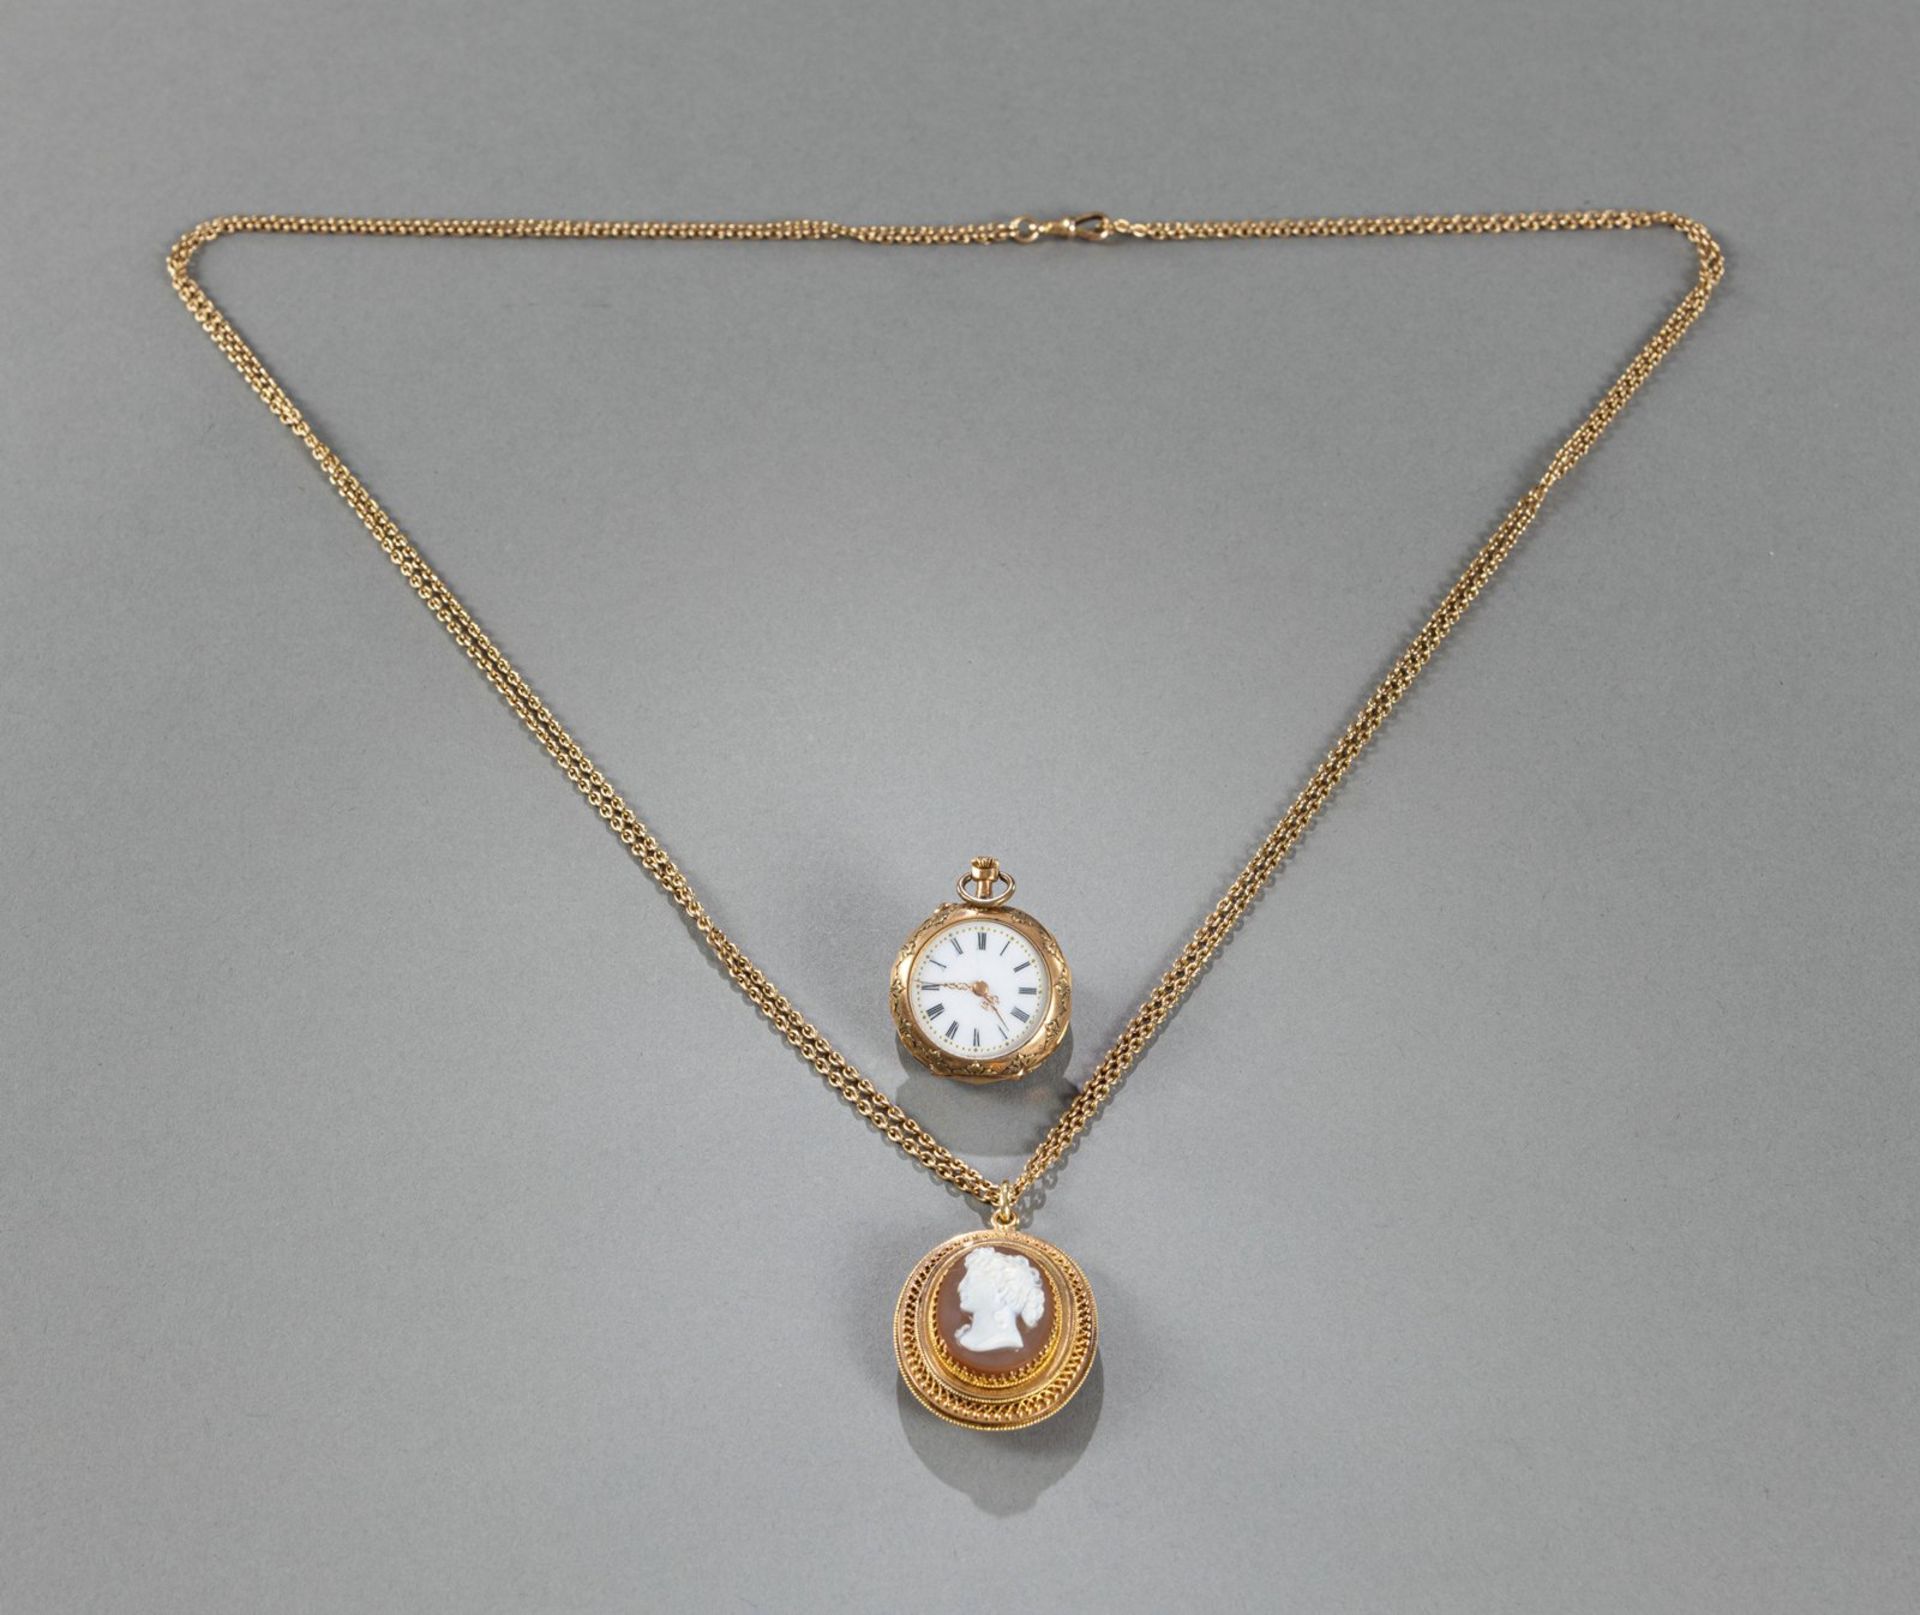 A CAMEO PENDANT WITH NECKLACE AND A LADY'S POCKET WATCH - Image 2 of 5